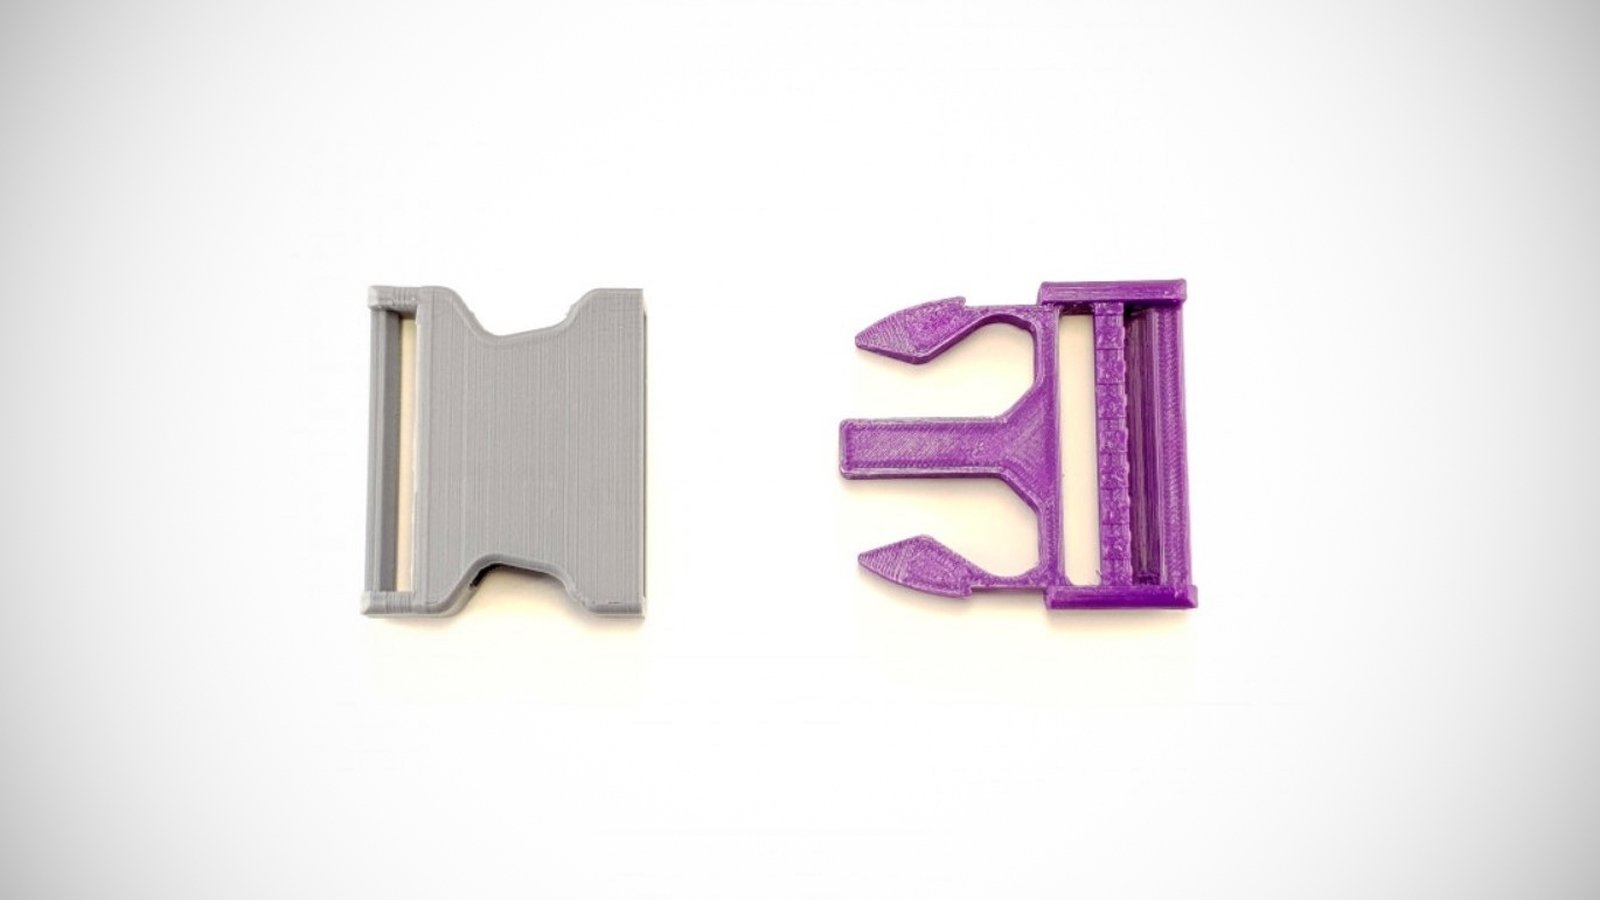 3D Snap Fit Joints: How to Design & Print Them | All3DP